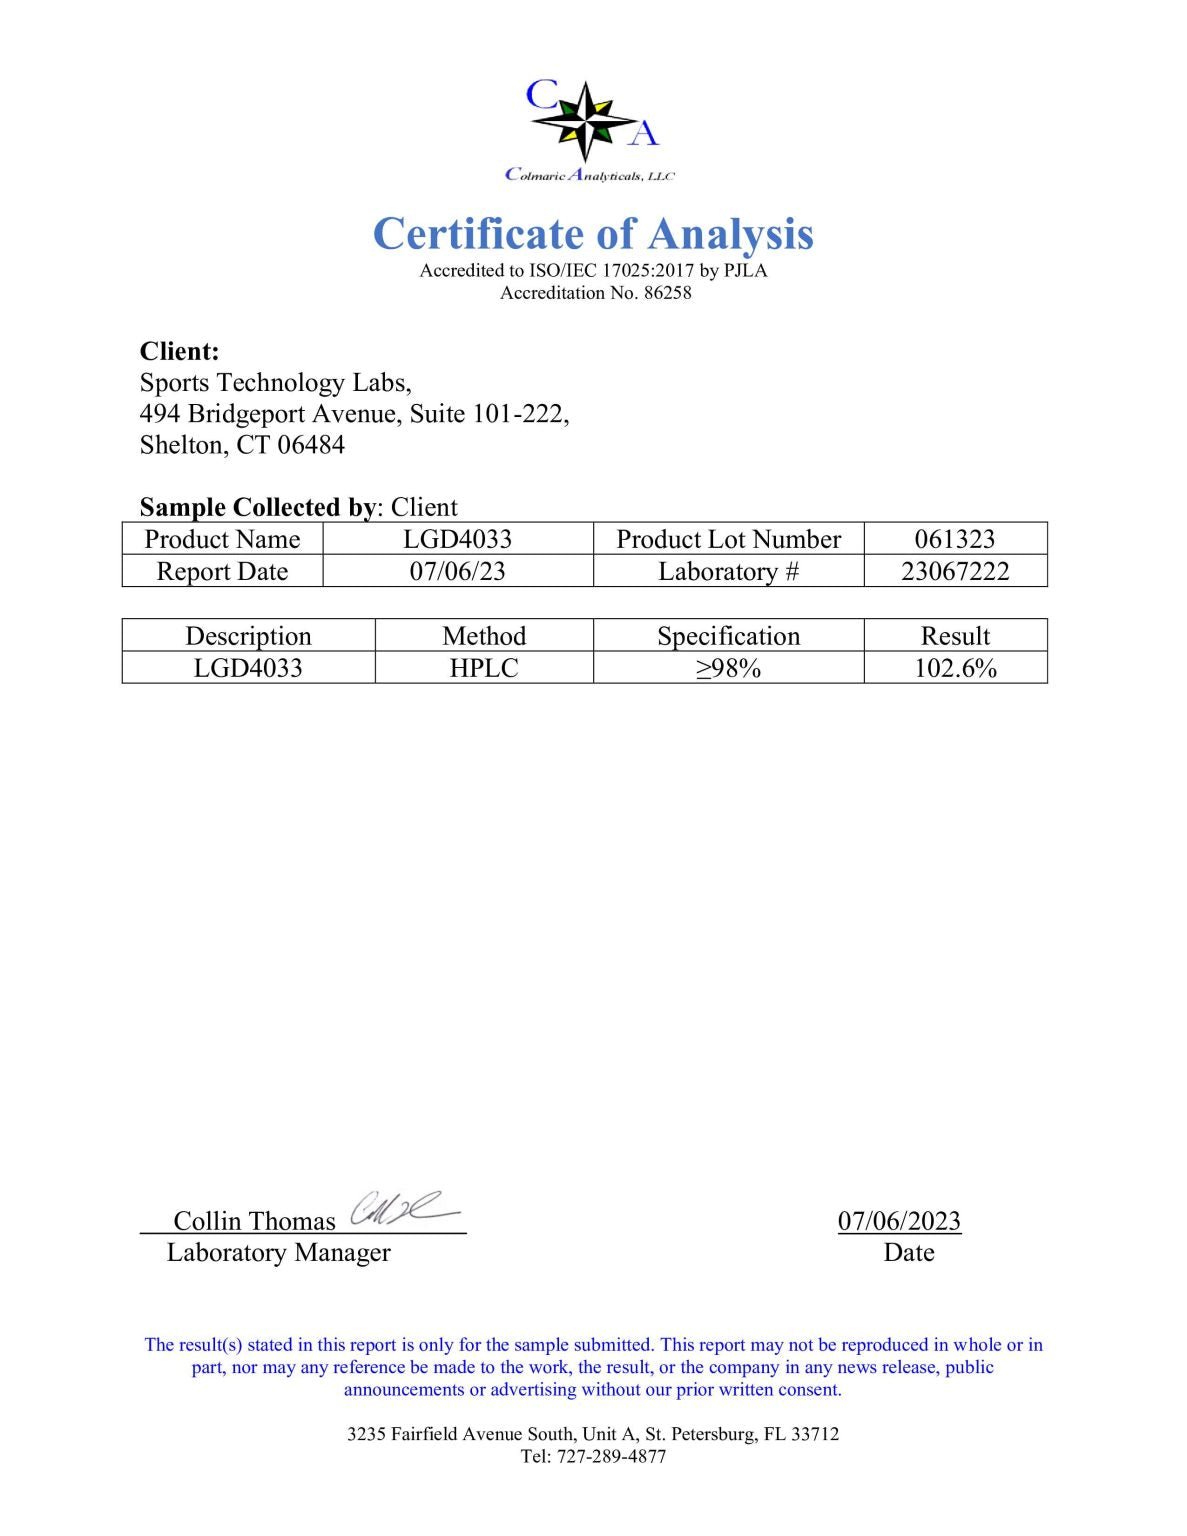 Sports Technology Labs Liquid SARMs LGD 4033 Certificate of Analysis